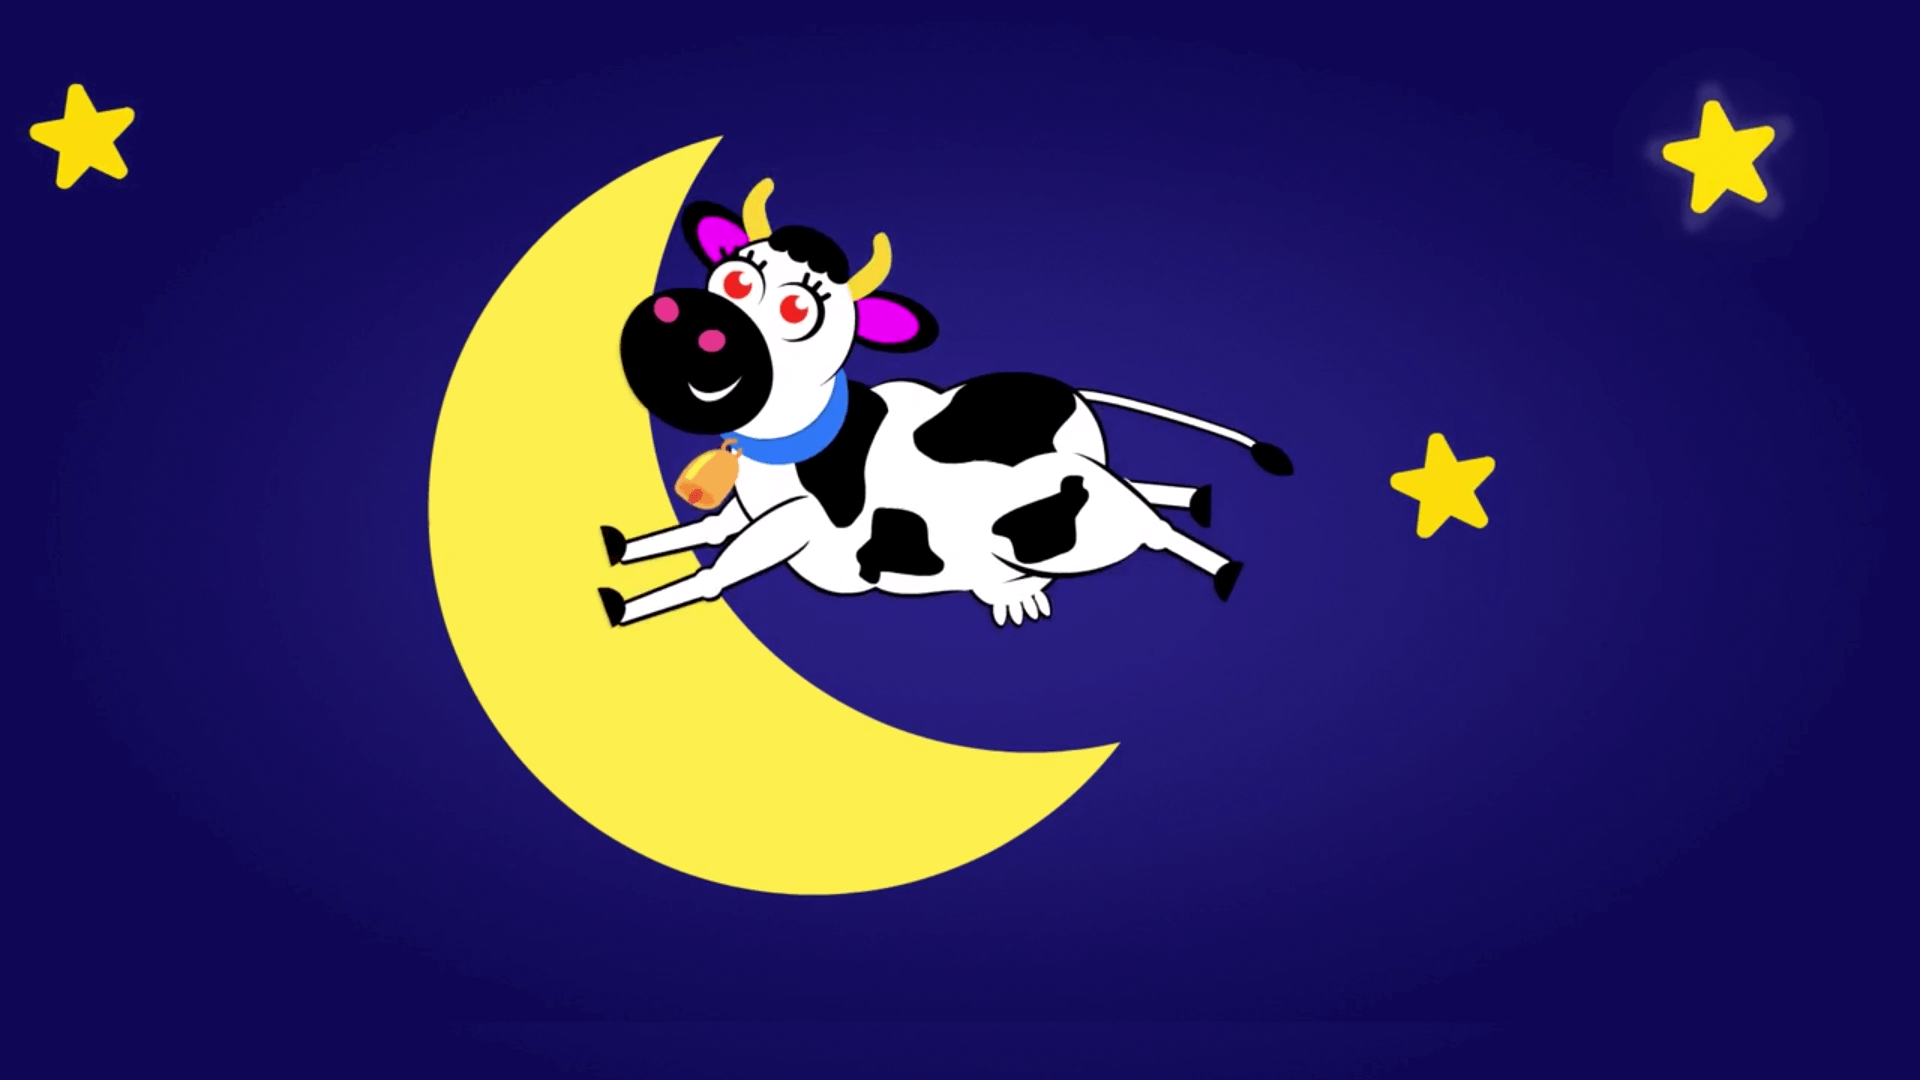 cow jumps over the moon in episode of the kneebouncers show on babyfirsttv